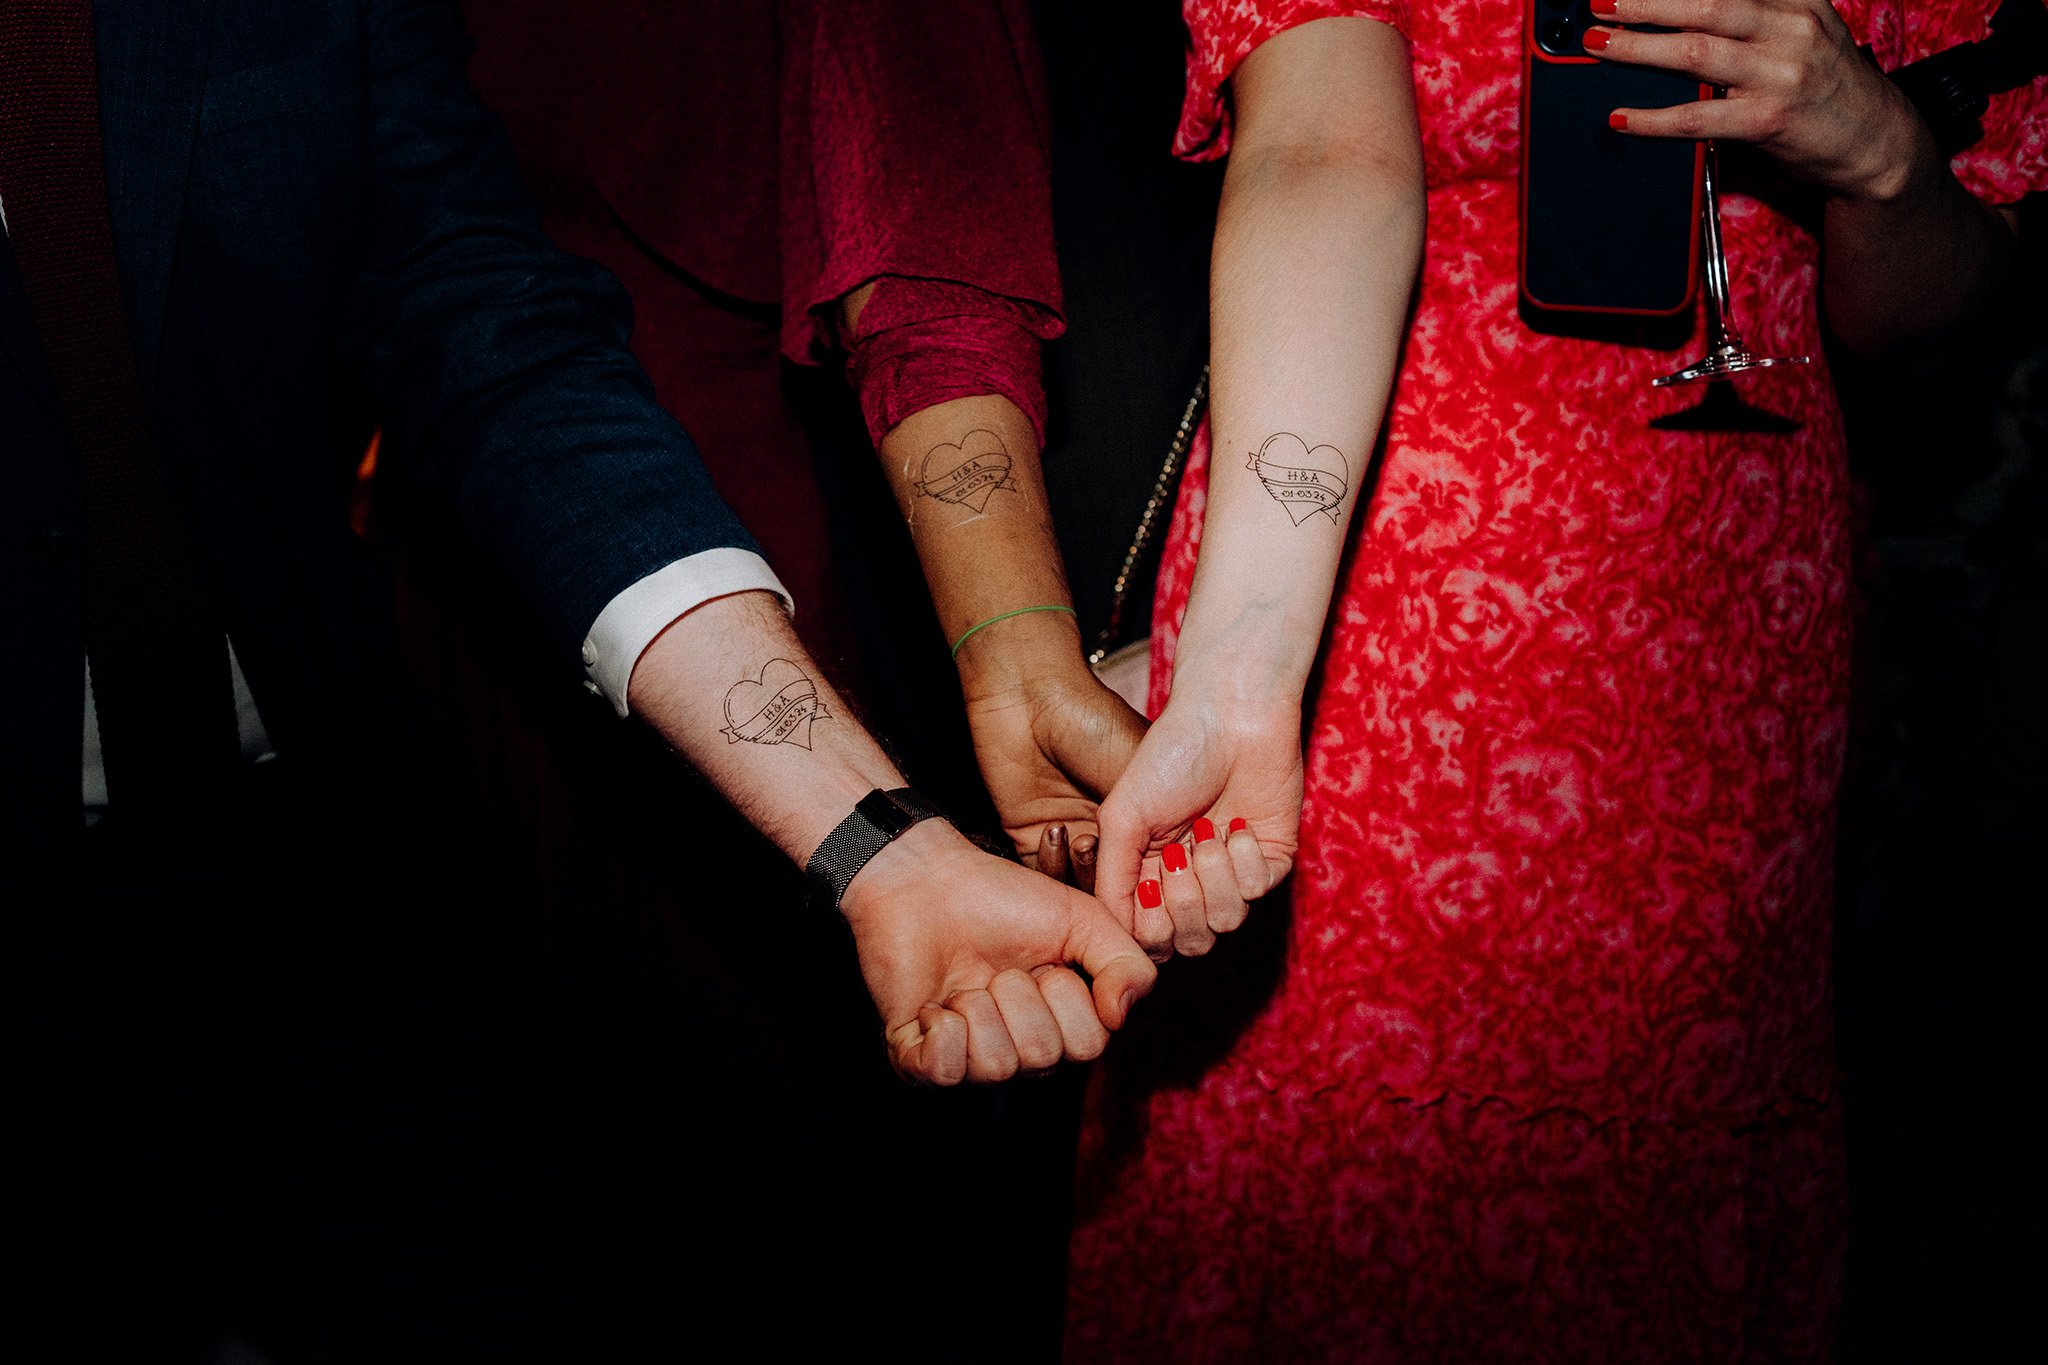 Instant tattoos being worn by guests, which were made by the groom